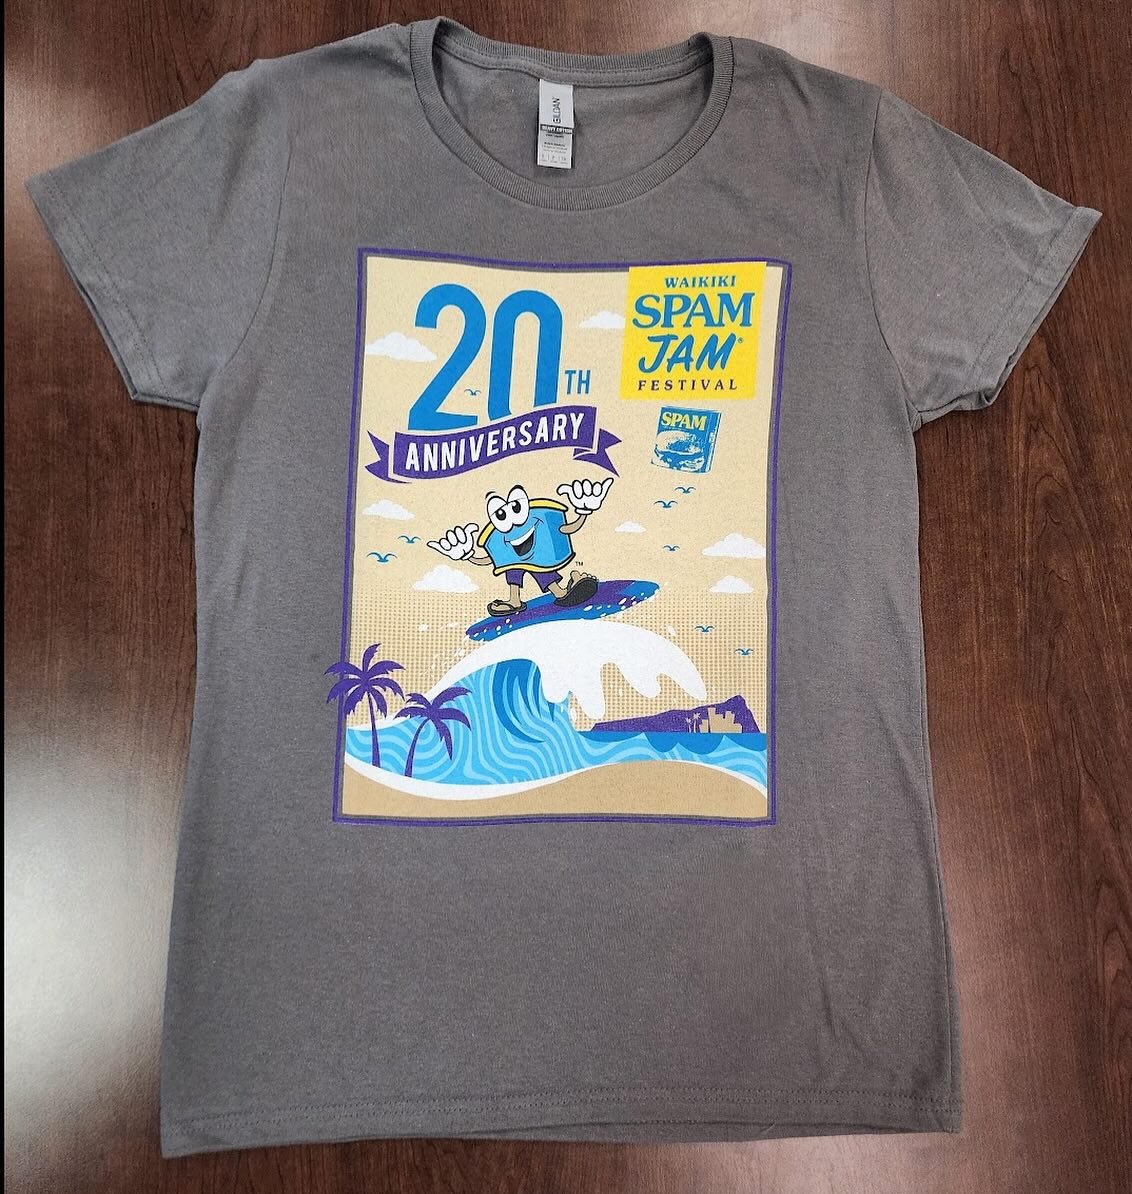 We still have 2024 Event T-Shirts on our online shop. Visit our website and click on &ldquo;ONLINE SPAM SHOP&rdquo; or visit https://waikikispamjam.square.site.